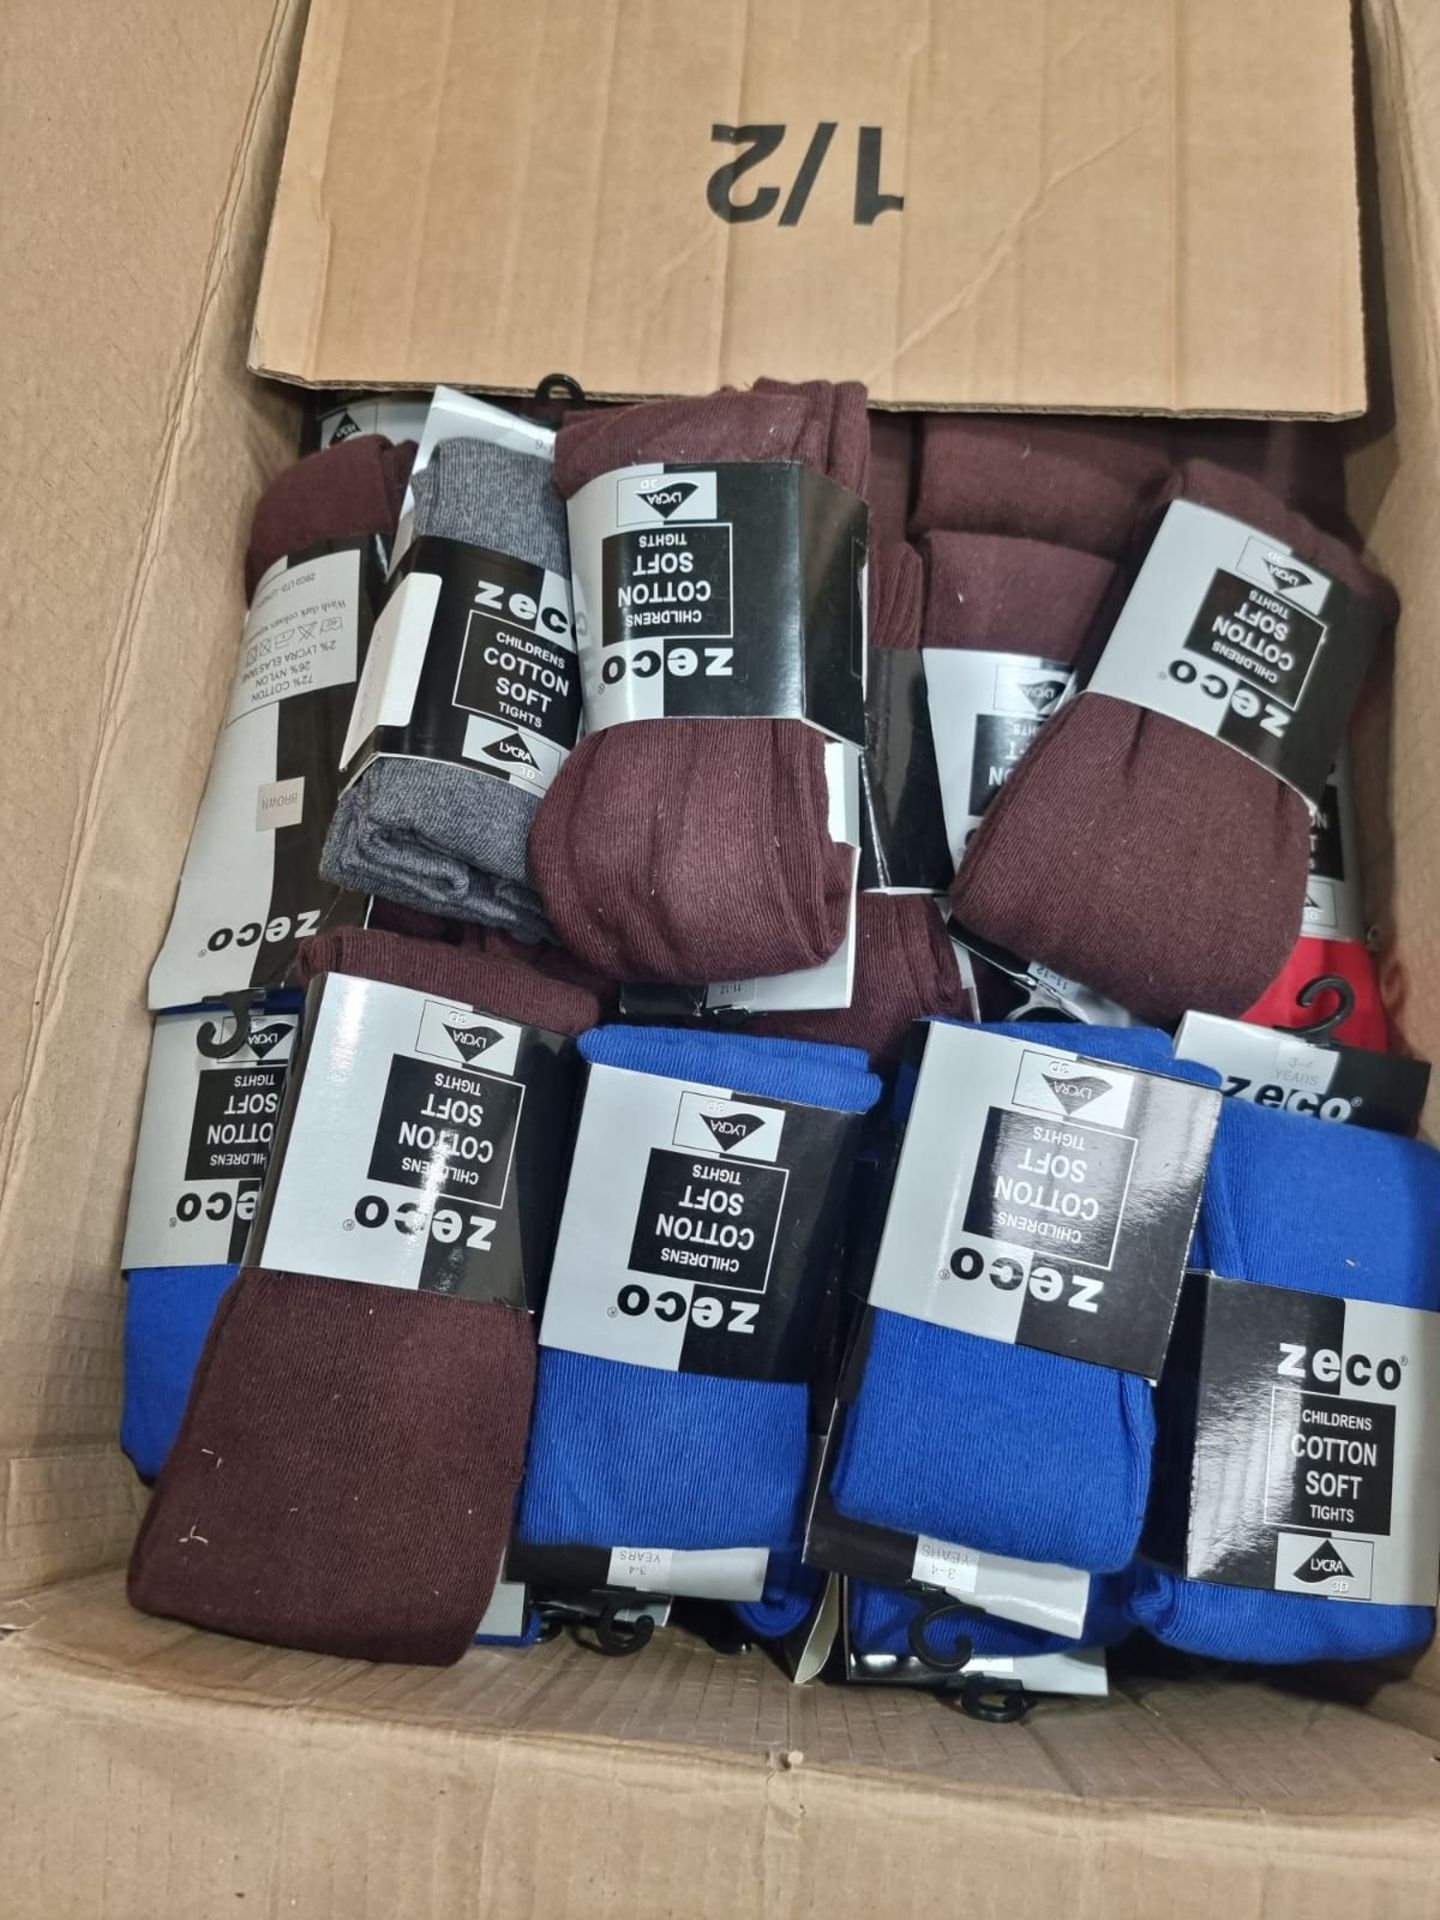 PALLET TO CONTAIN A LARGE QUANTITY OF NEW CLOTHING GOODS. MAY INCLUDE ITEMS SUCH AS: T-SHIRTS, - Image 7 of 28